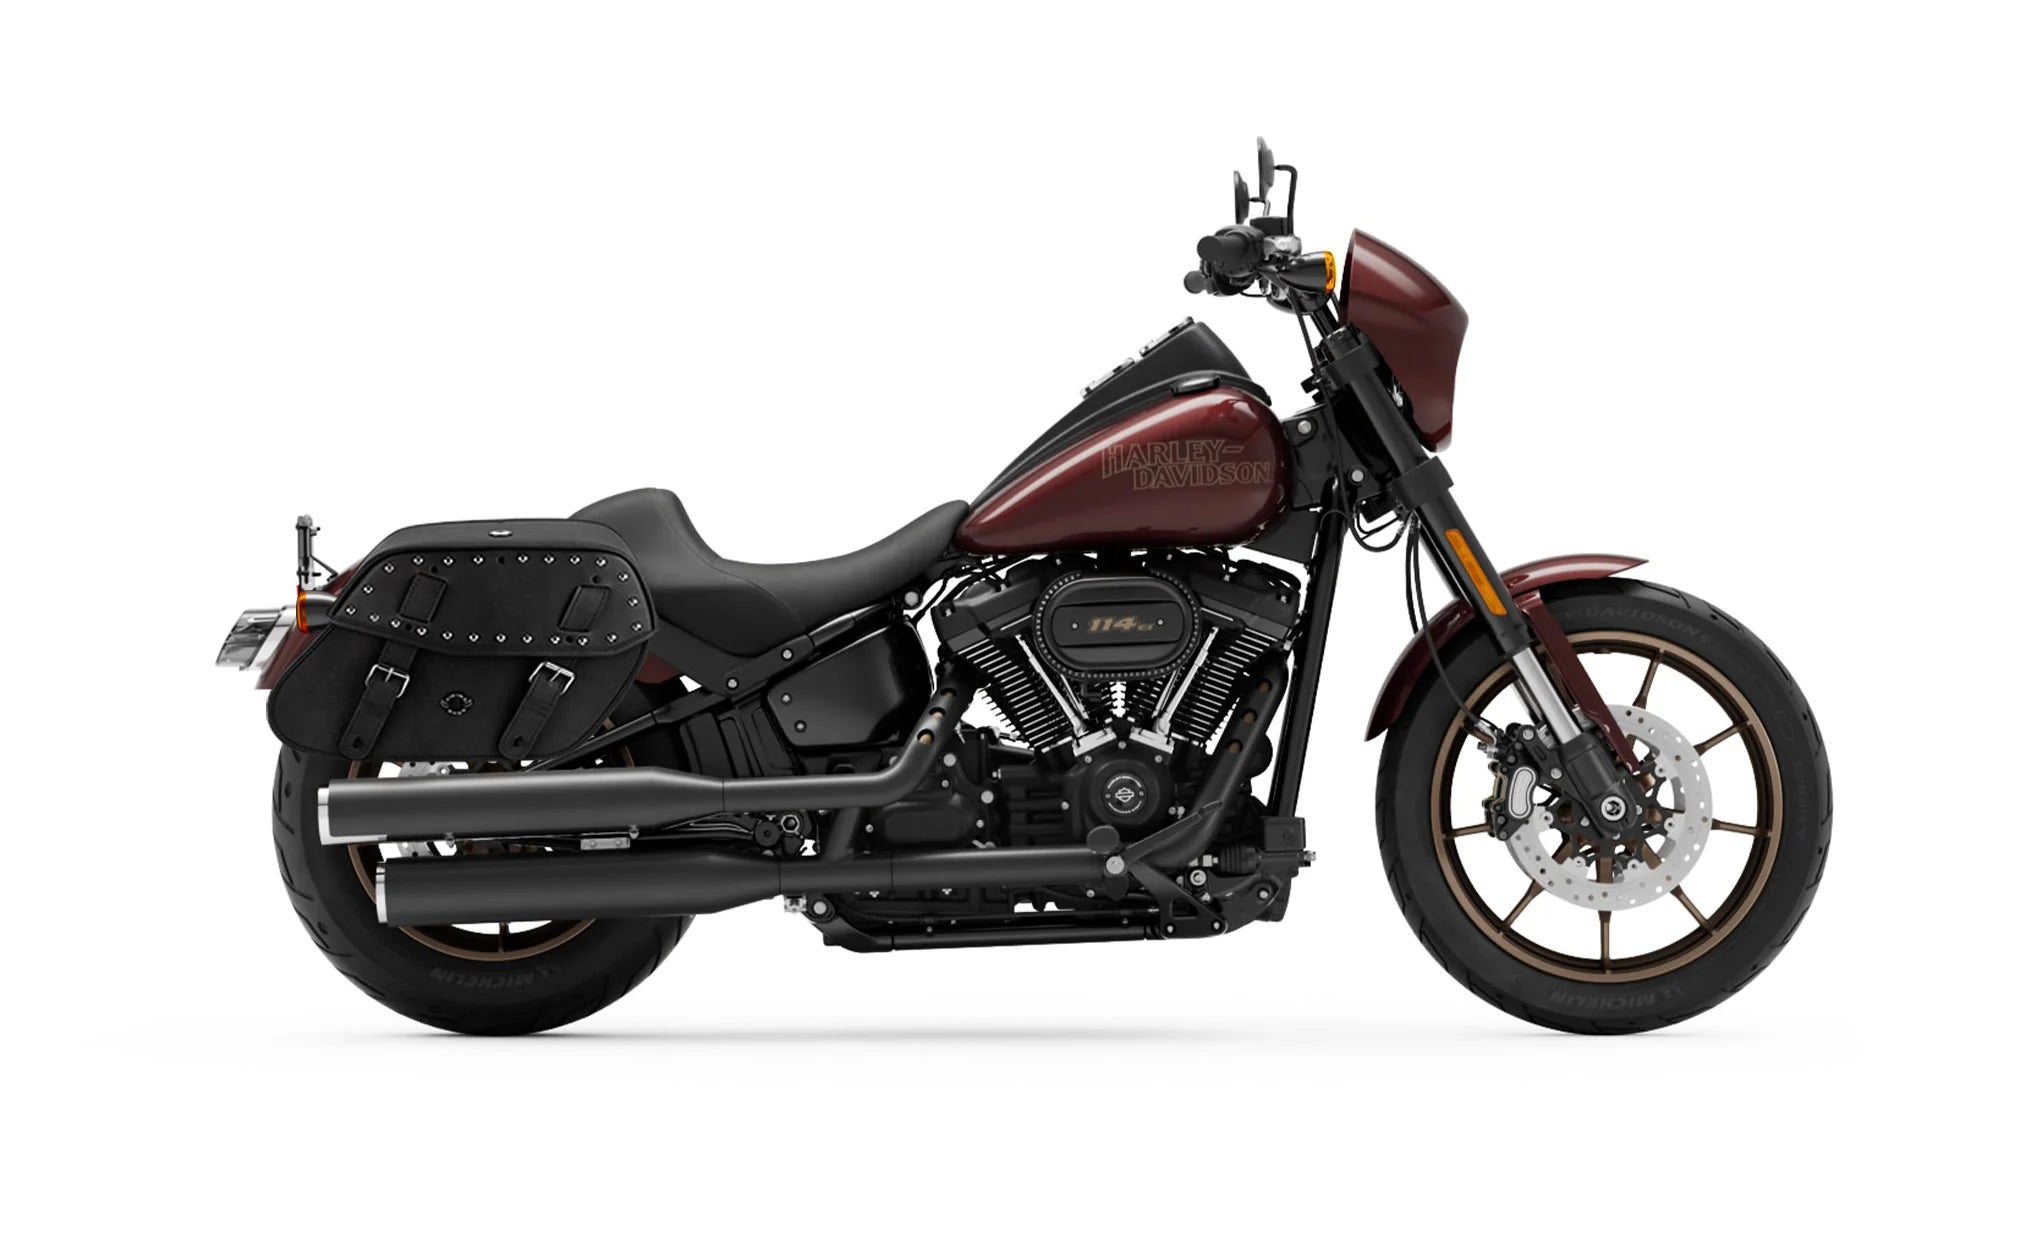 Viking Odin Large Studded Leather Motorcycle Saddlebags For Harley Softail Low Rider S Fxlrs on Bike Photo @expand